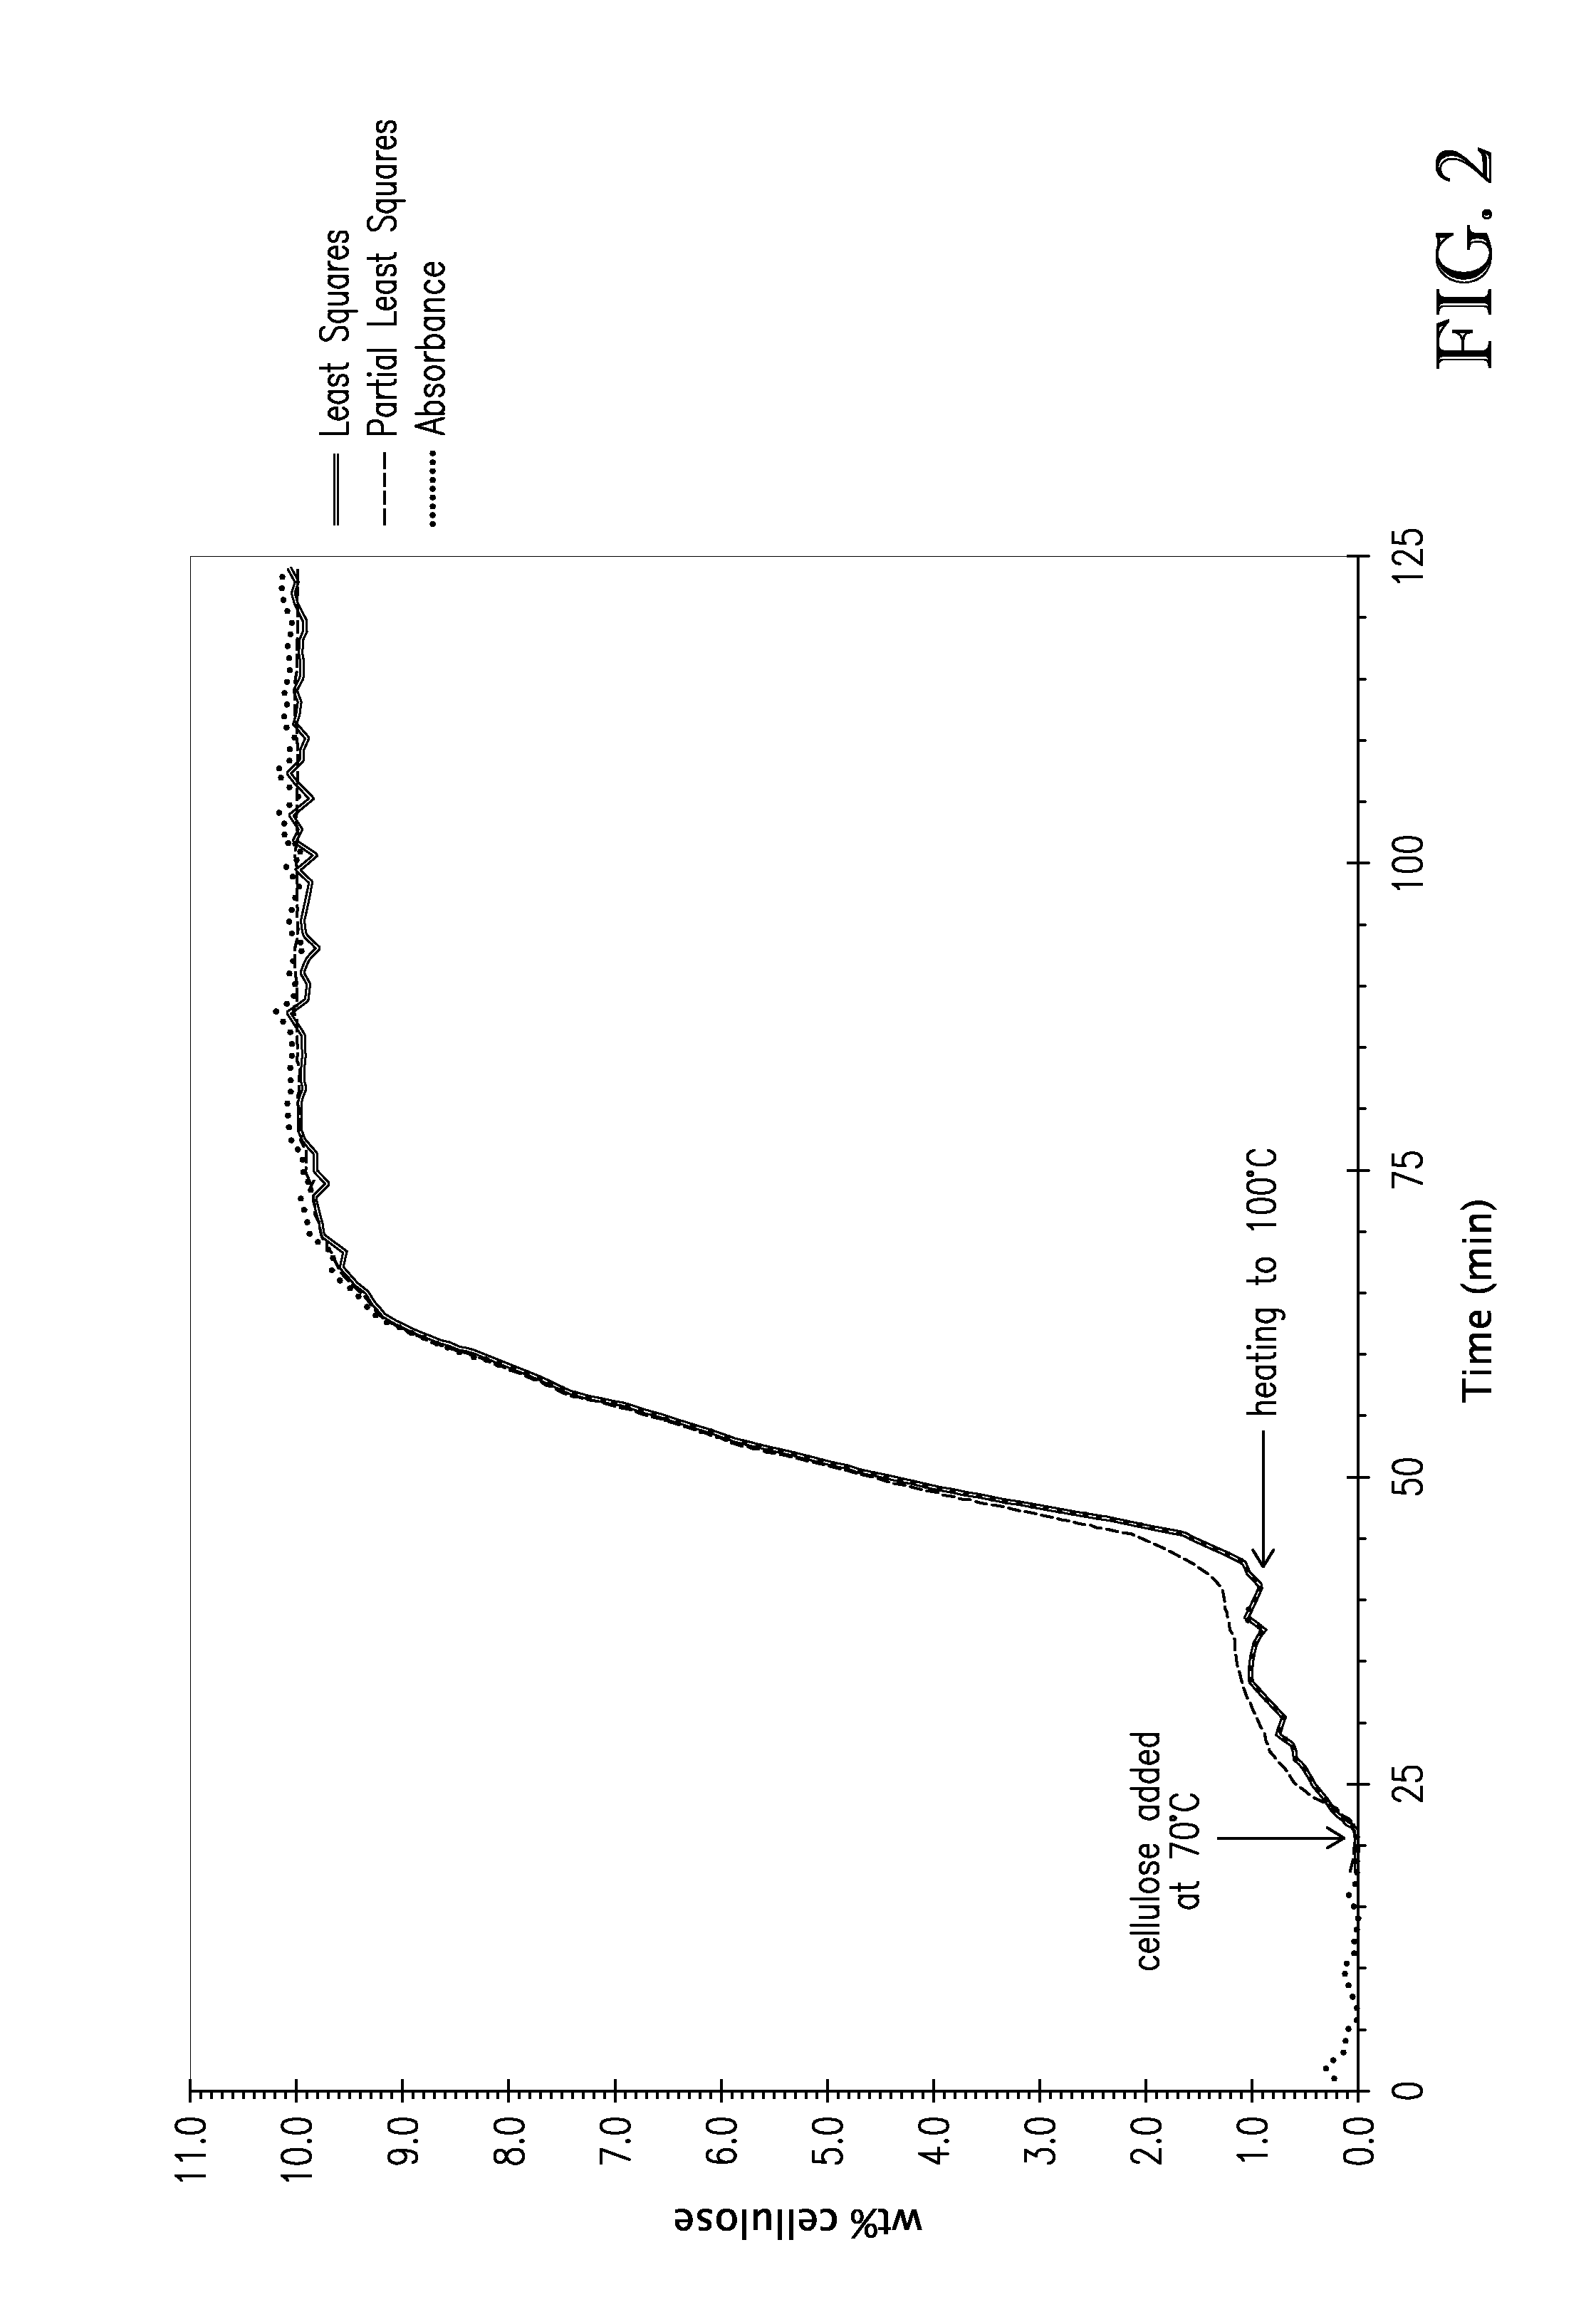 Cellulose solutions comprising tetraalkylammonium alkylphosphate and products produced therefrom